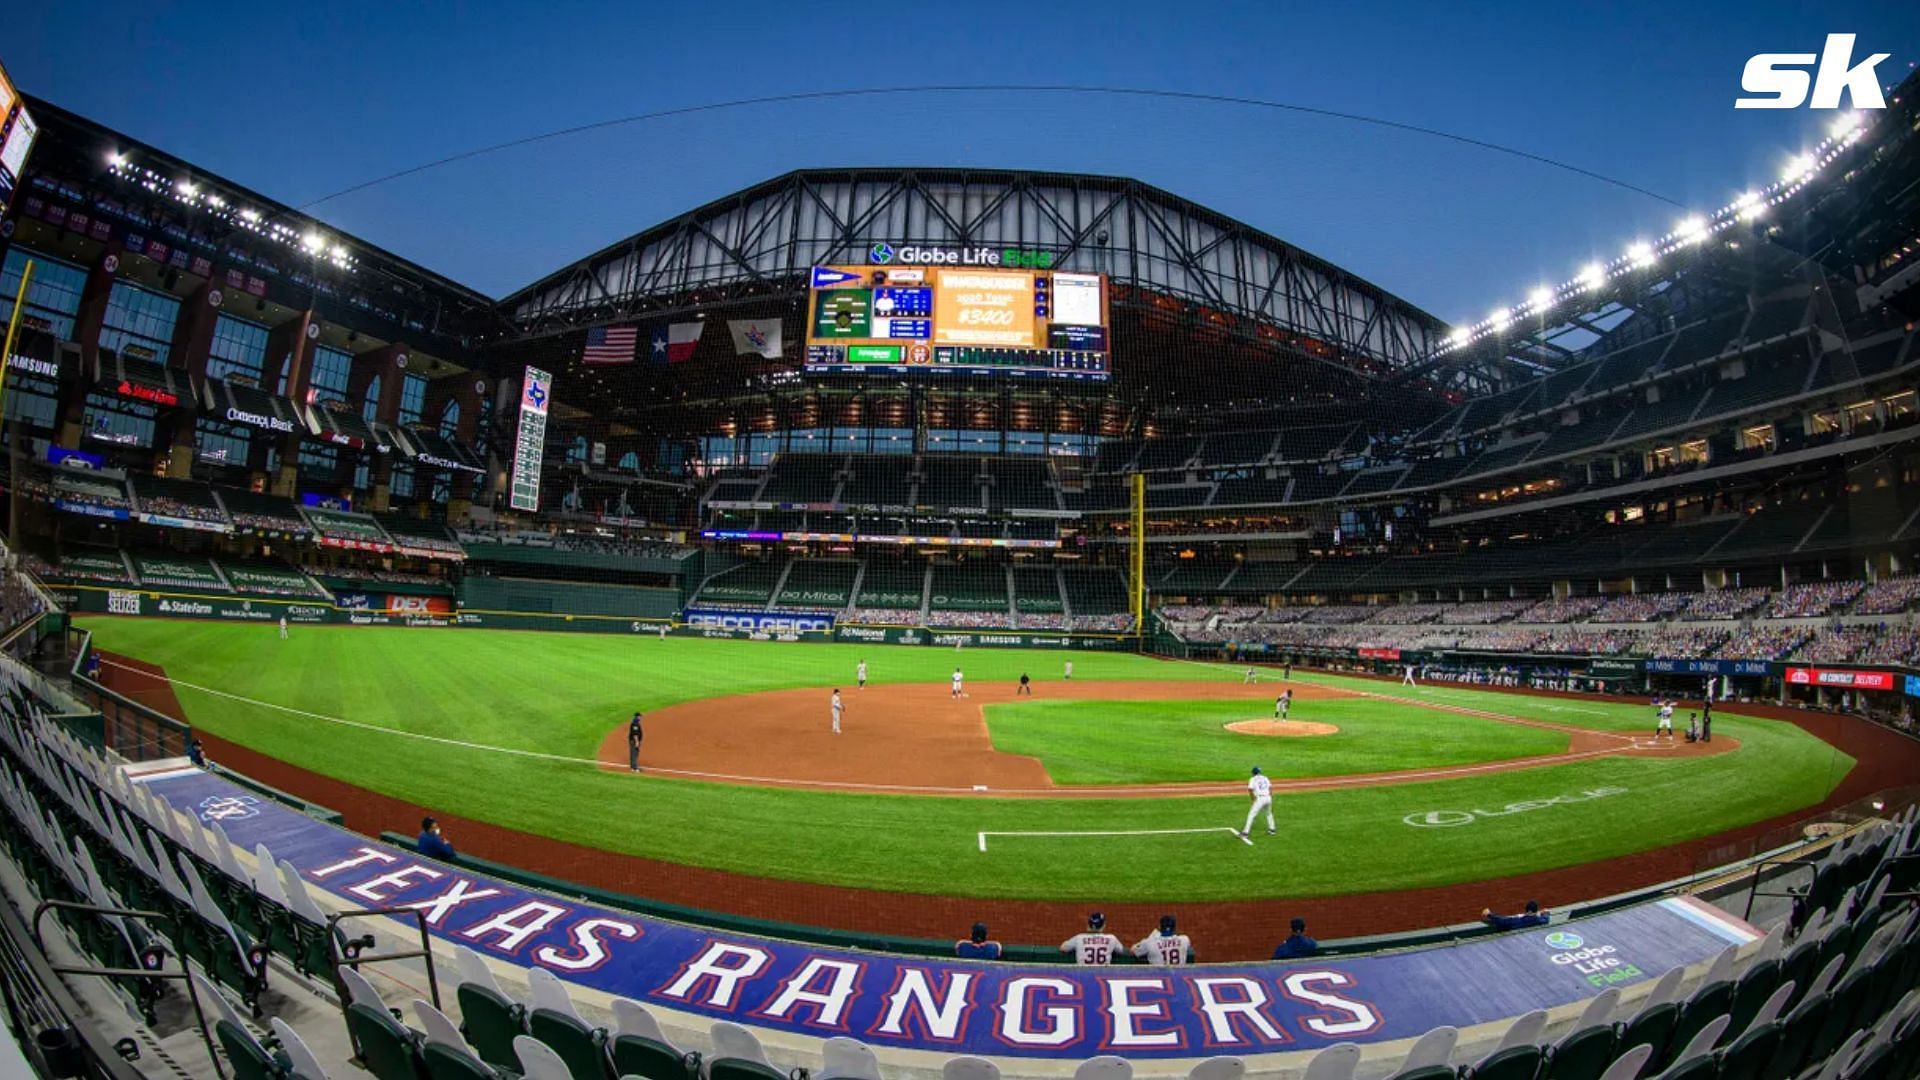 Texas Rangers Ballpark Set To Host The MLB All Star Game In Excited To Once Again Feature